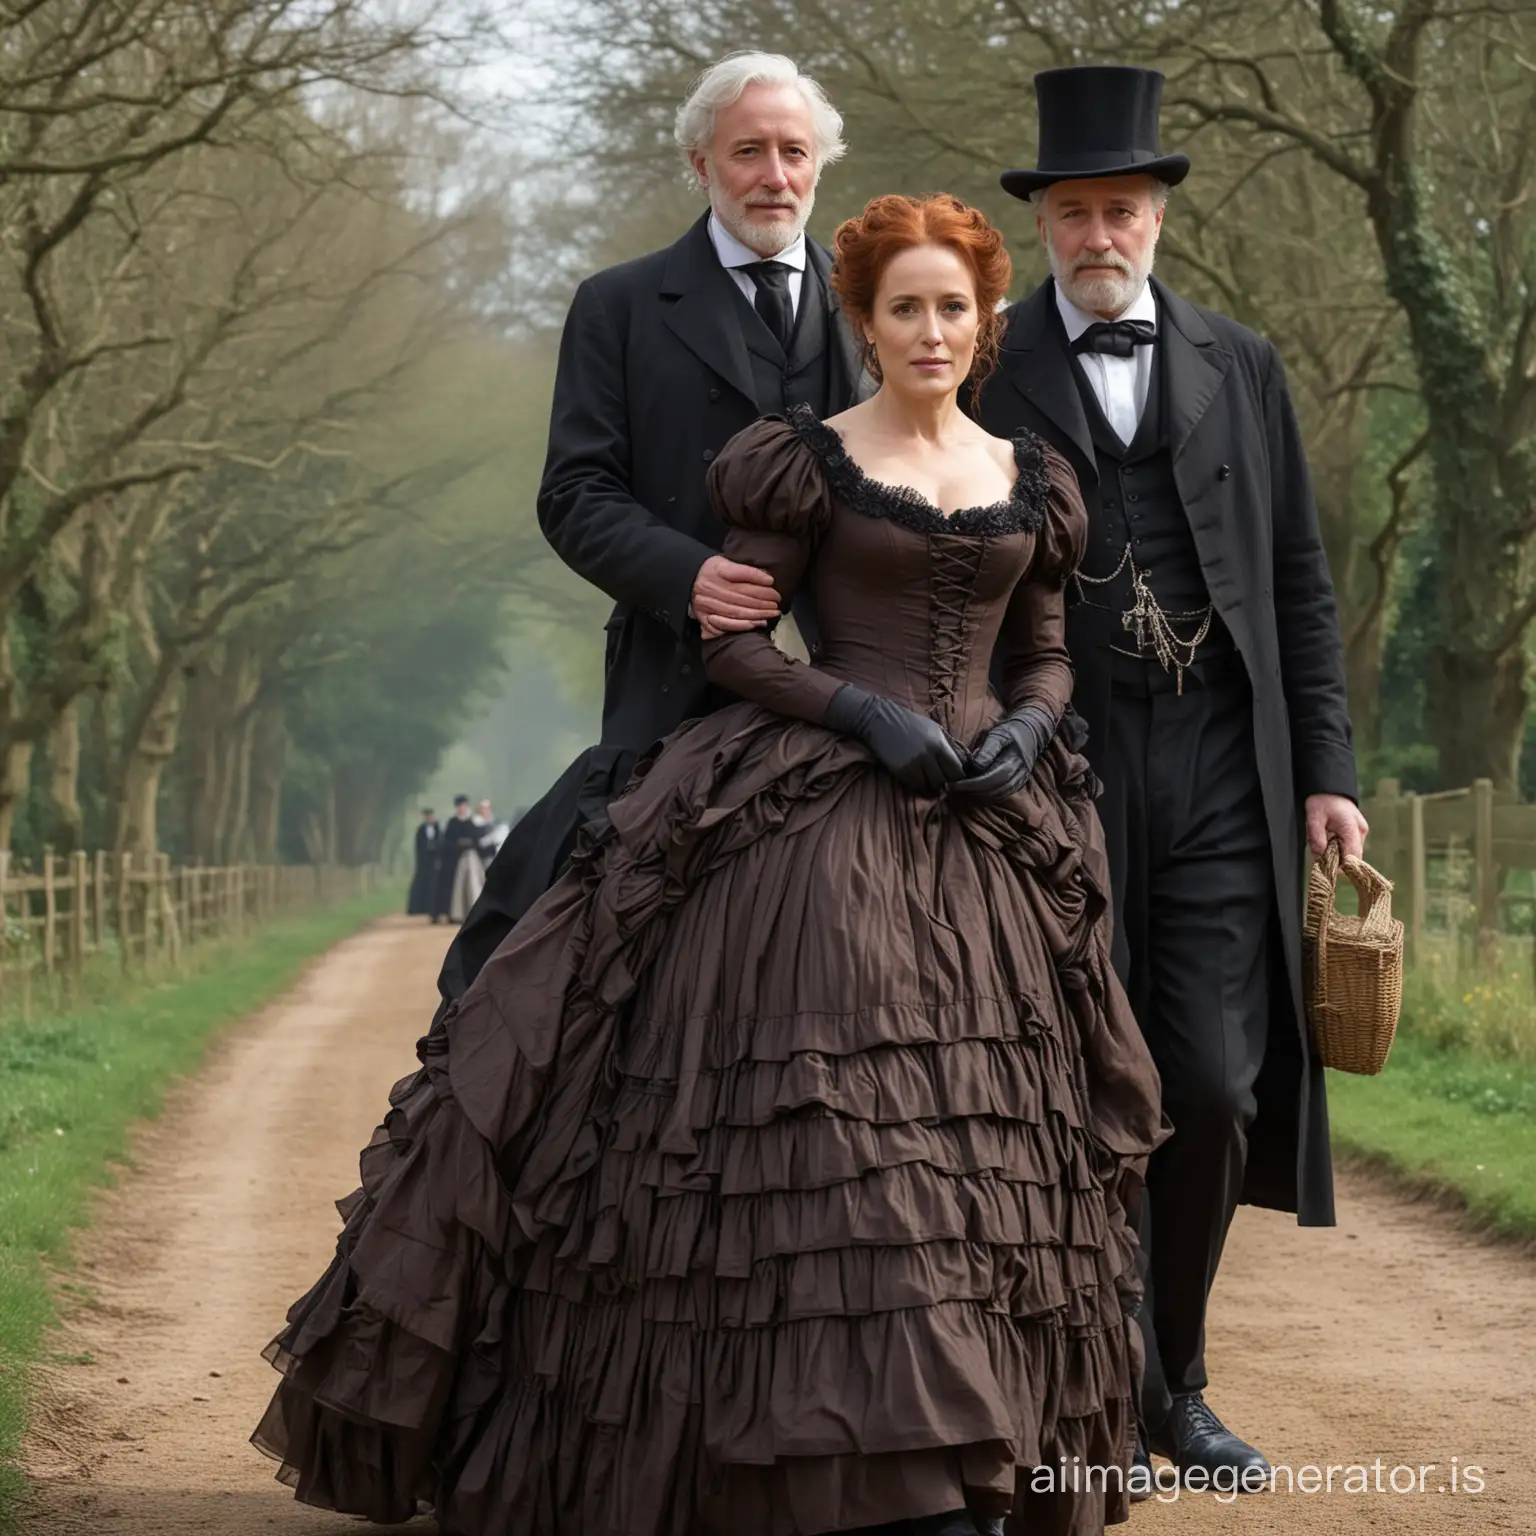 Victorian-Newlyweds-Elegant-RedHaired-Bride-and-Groom-in-1860s-Fashion